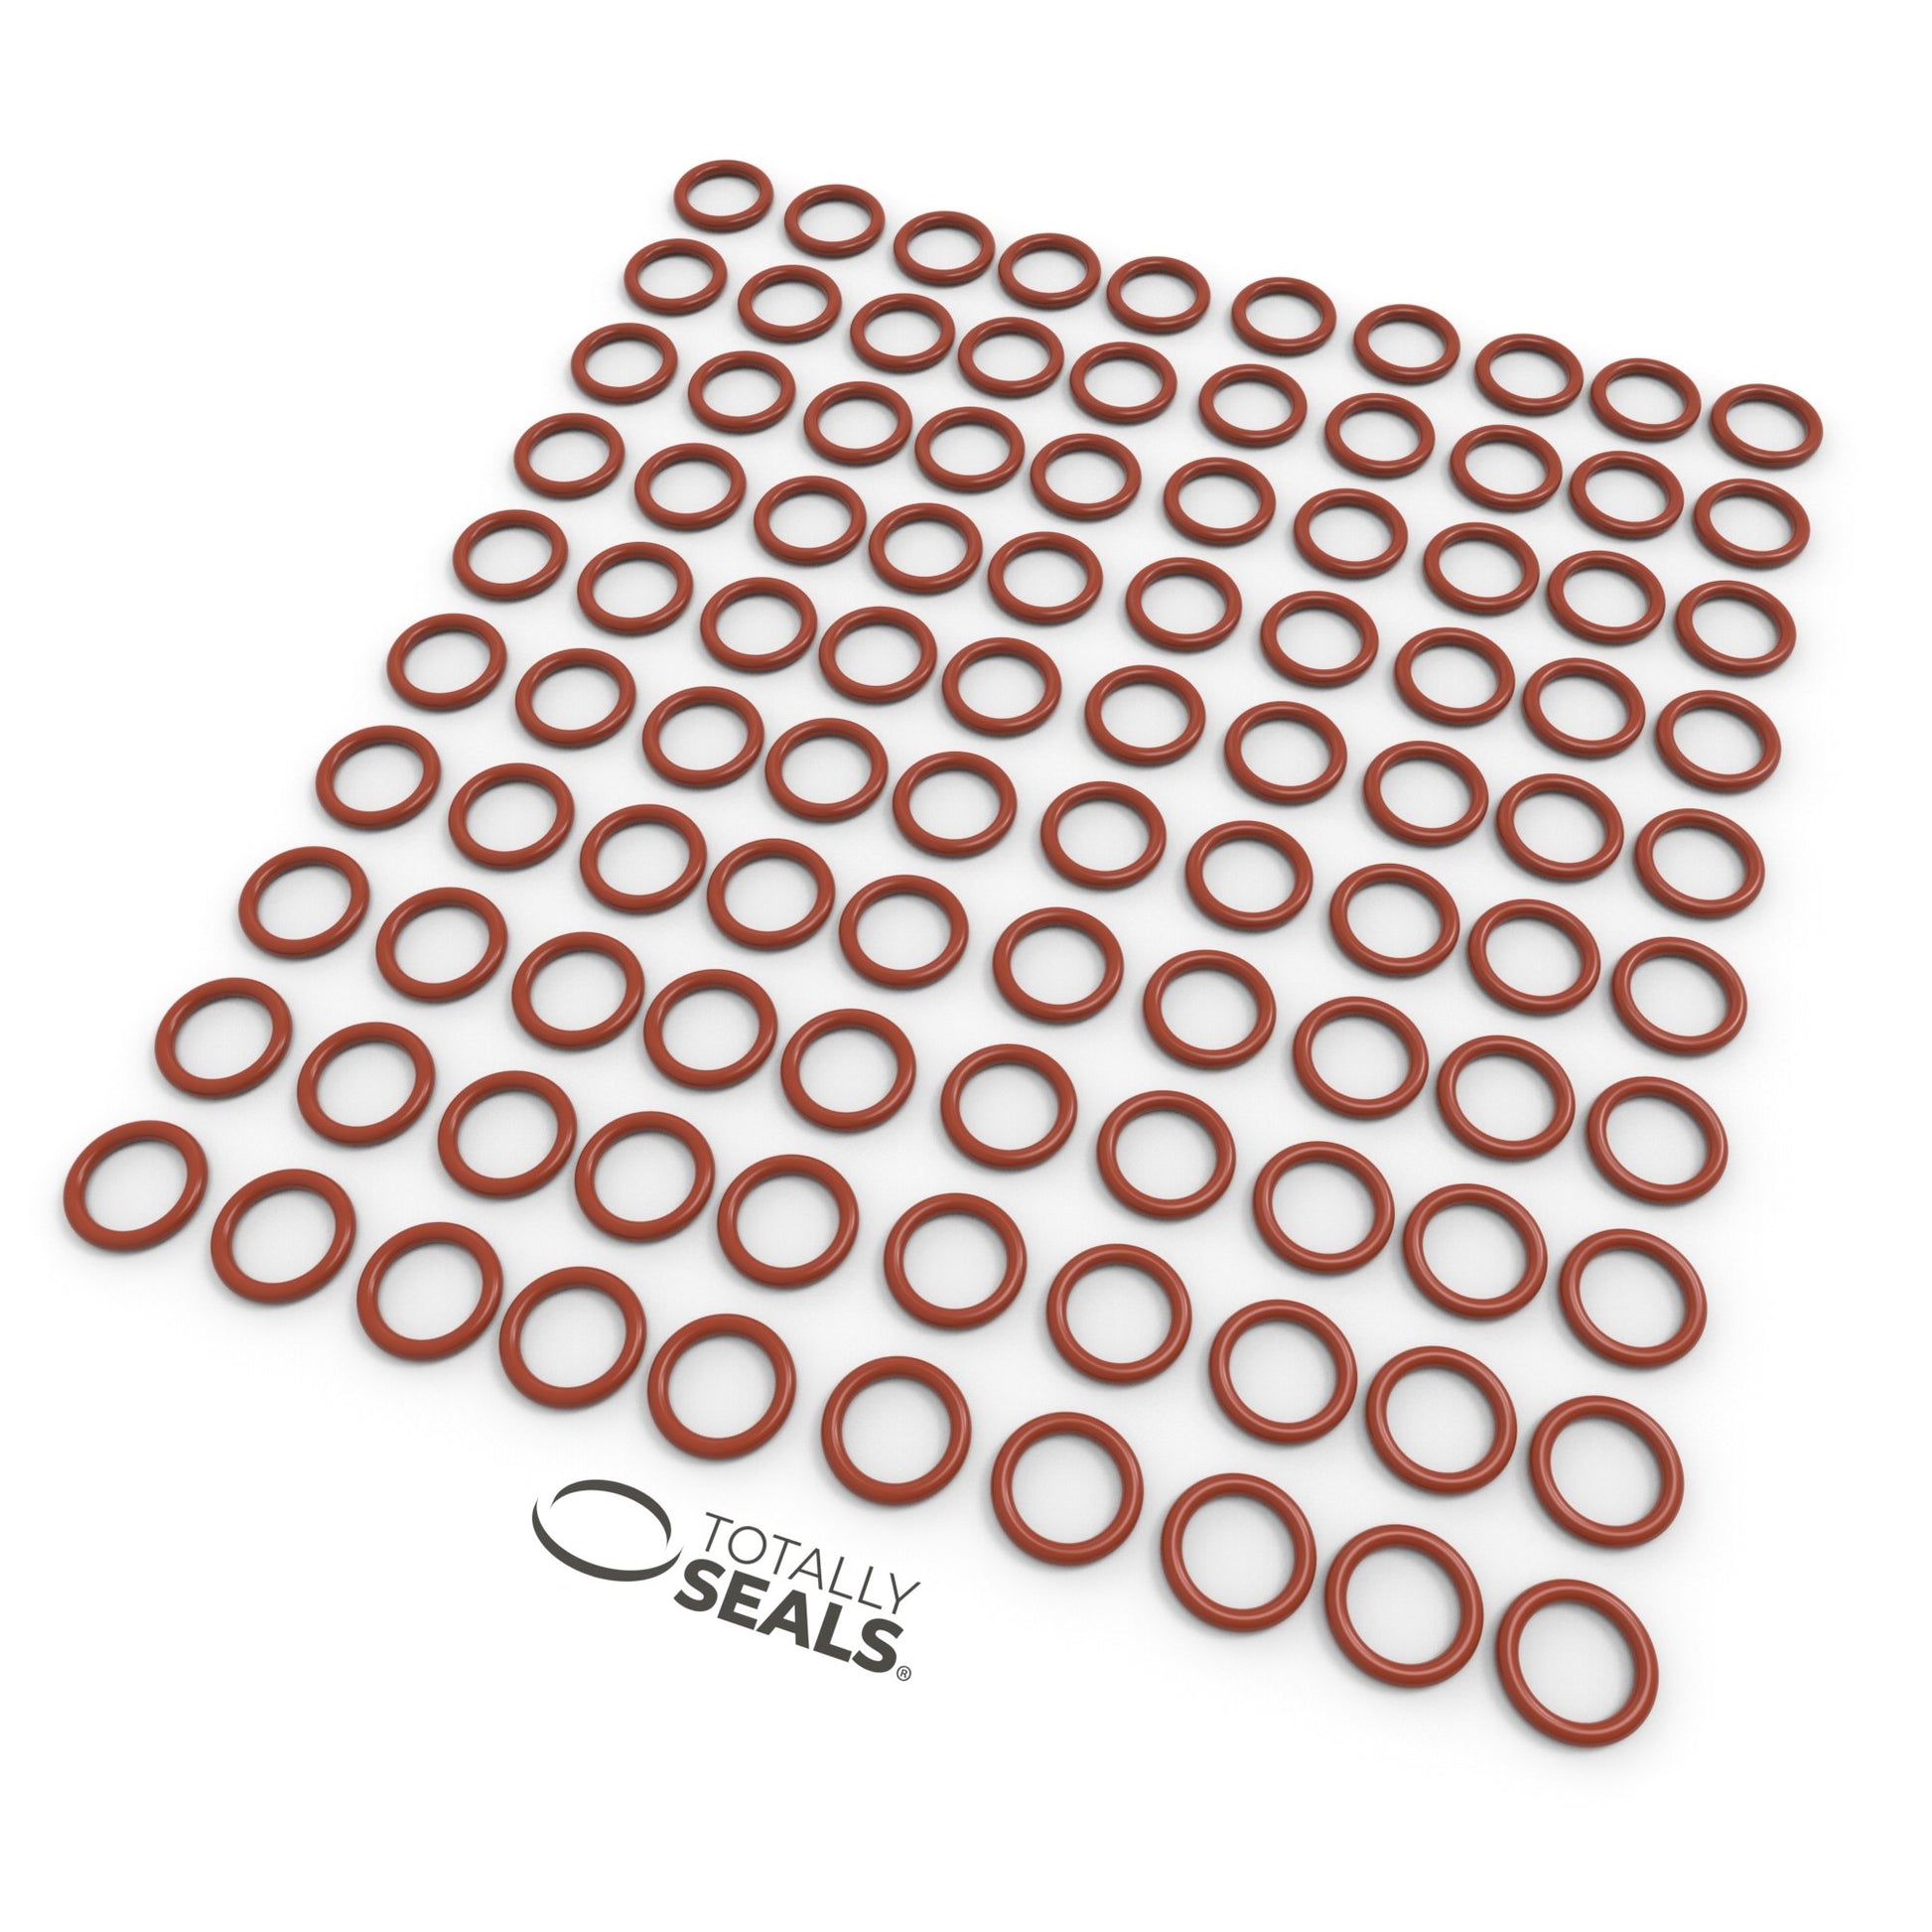 3mm x 2mm (7mm OD) Silicone O-Rings - Totally Seals®